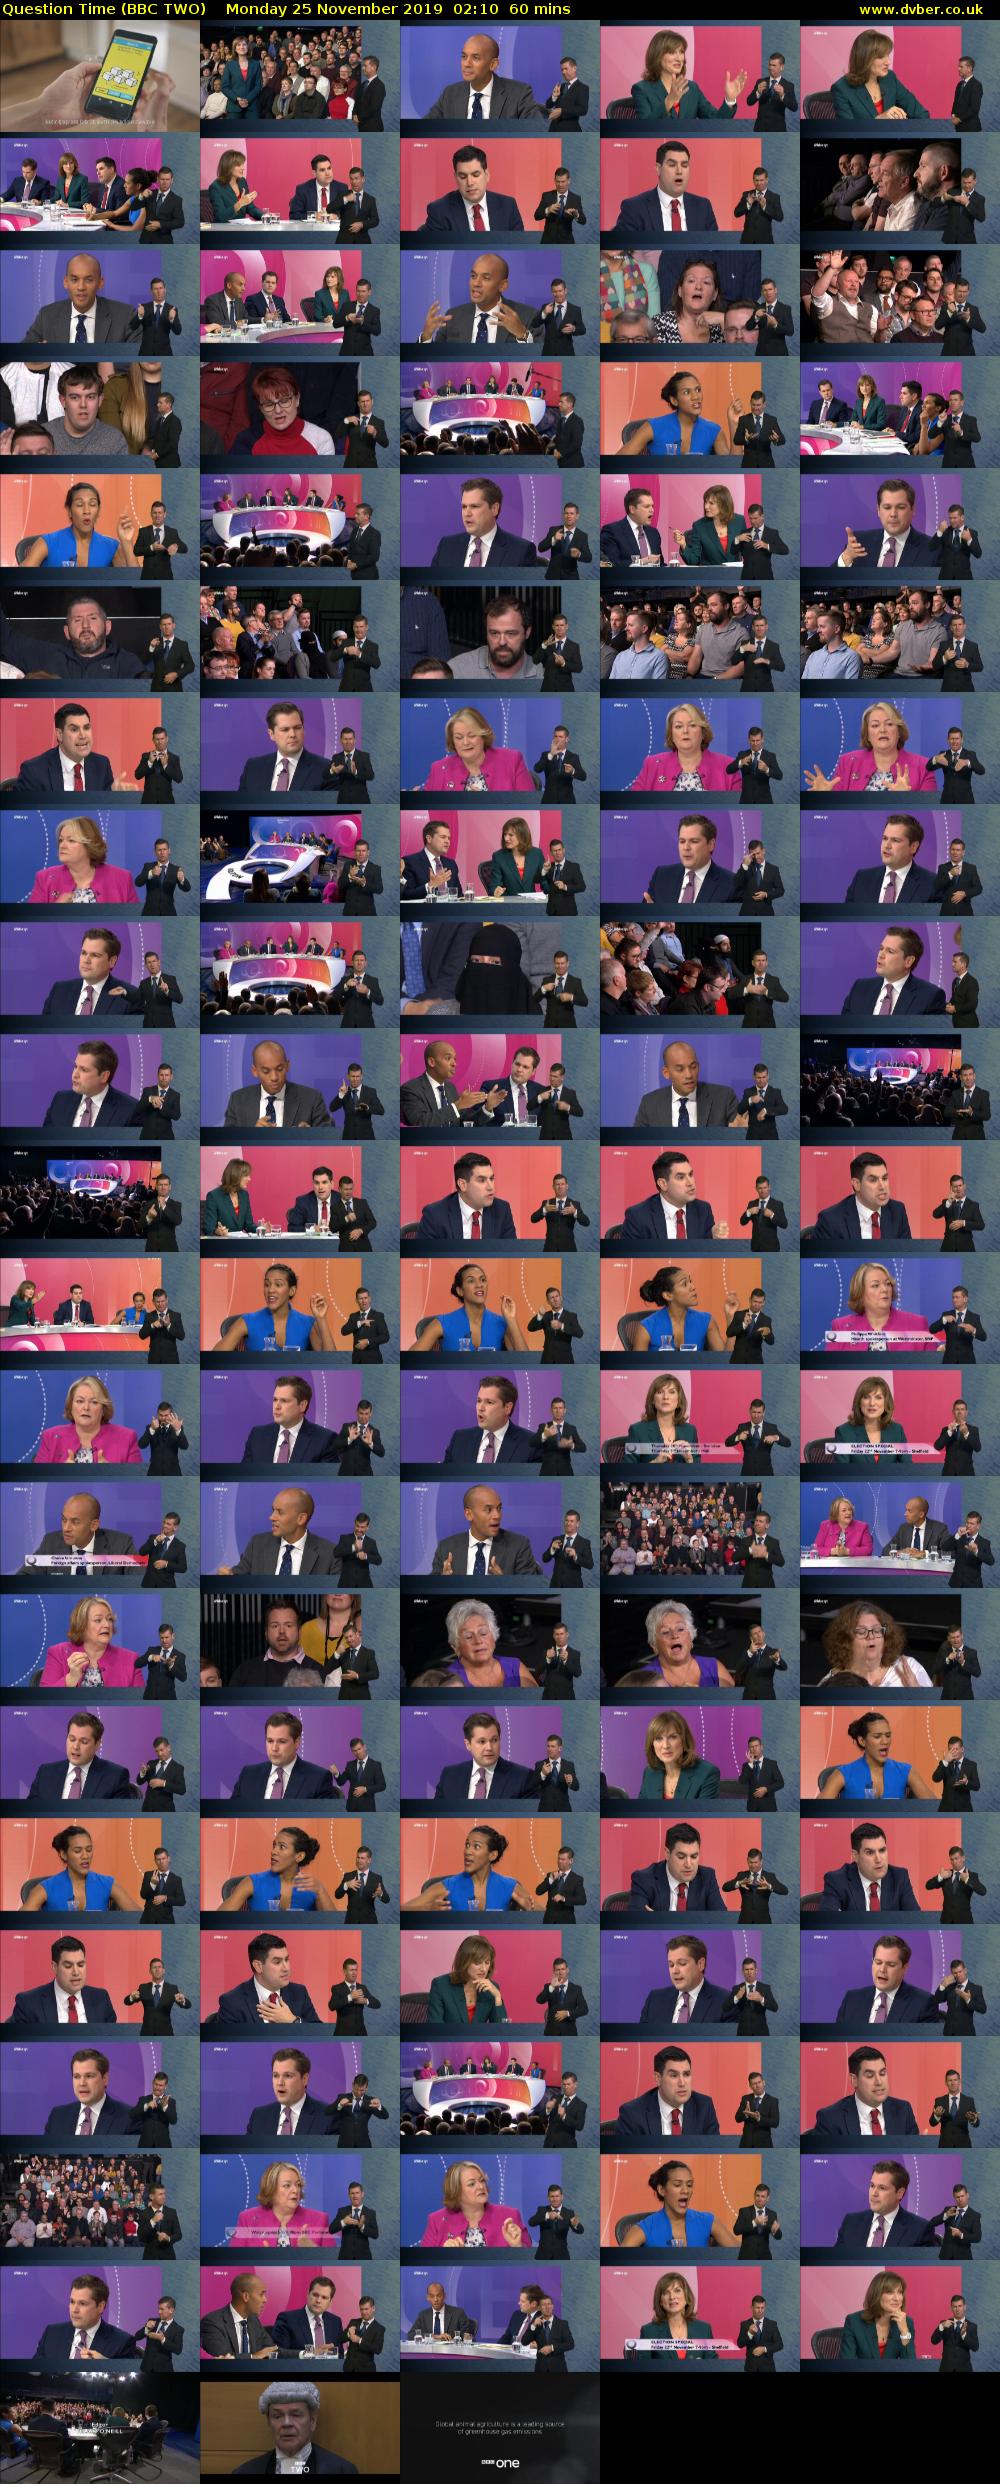 Question Time (BBC TWO) Monday 25 November 2019 02:10 - 03:10